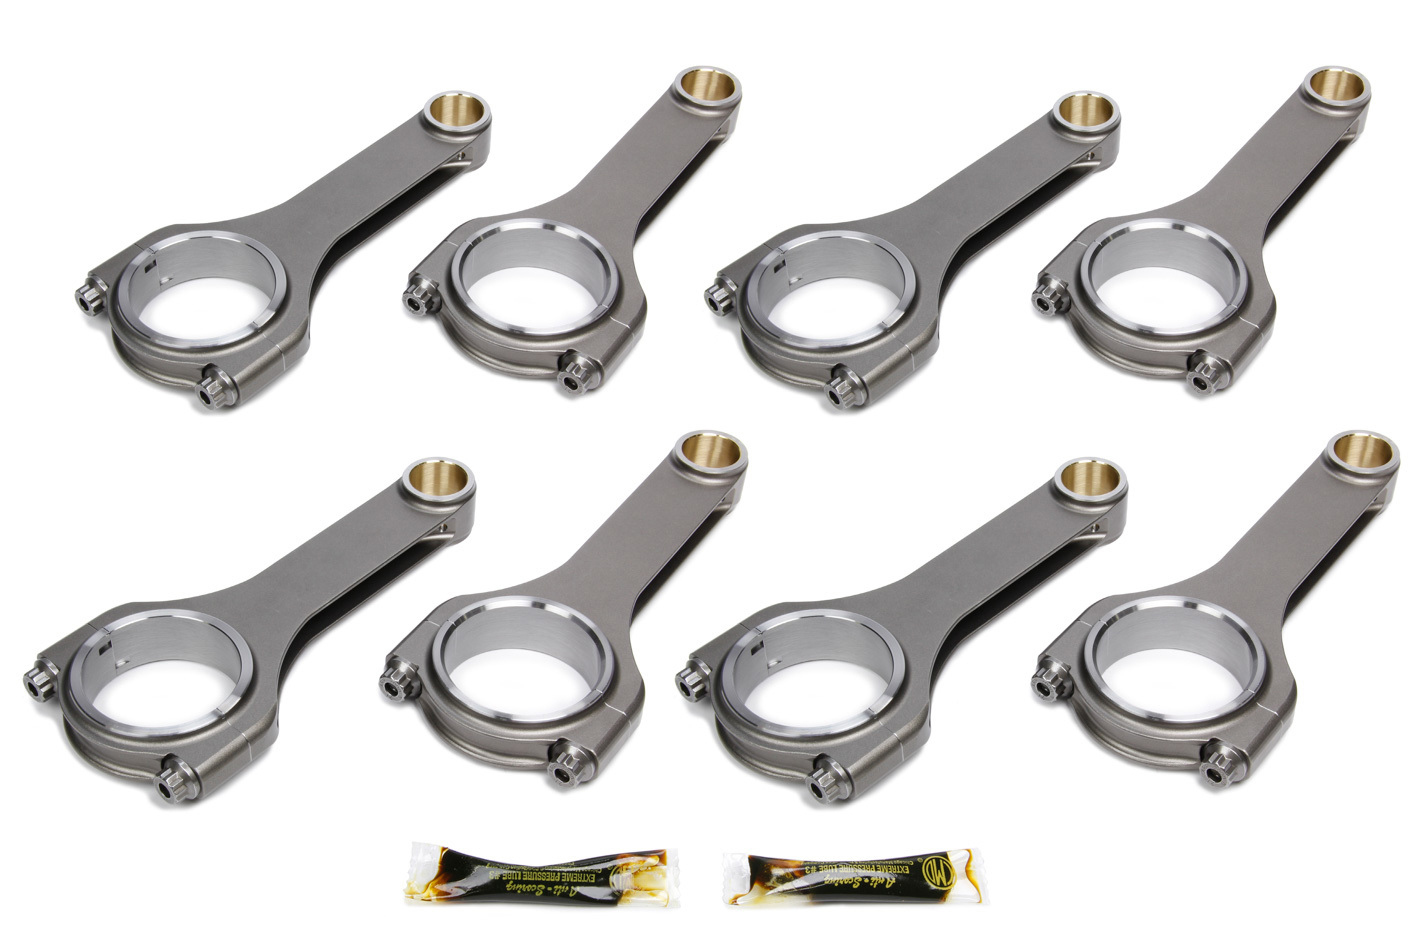 Dyers Rods 6000NLSBCLJ7200AD Connecting Rod, Ultra Light Series, H-Beam, 6.000 in Long, Bushed, 7/16 in Cap Screws, Forged Steel, Small Block Chevy, Set of 8